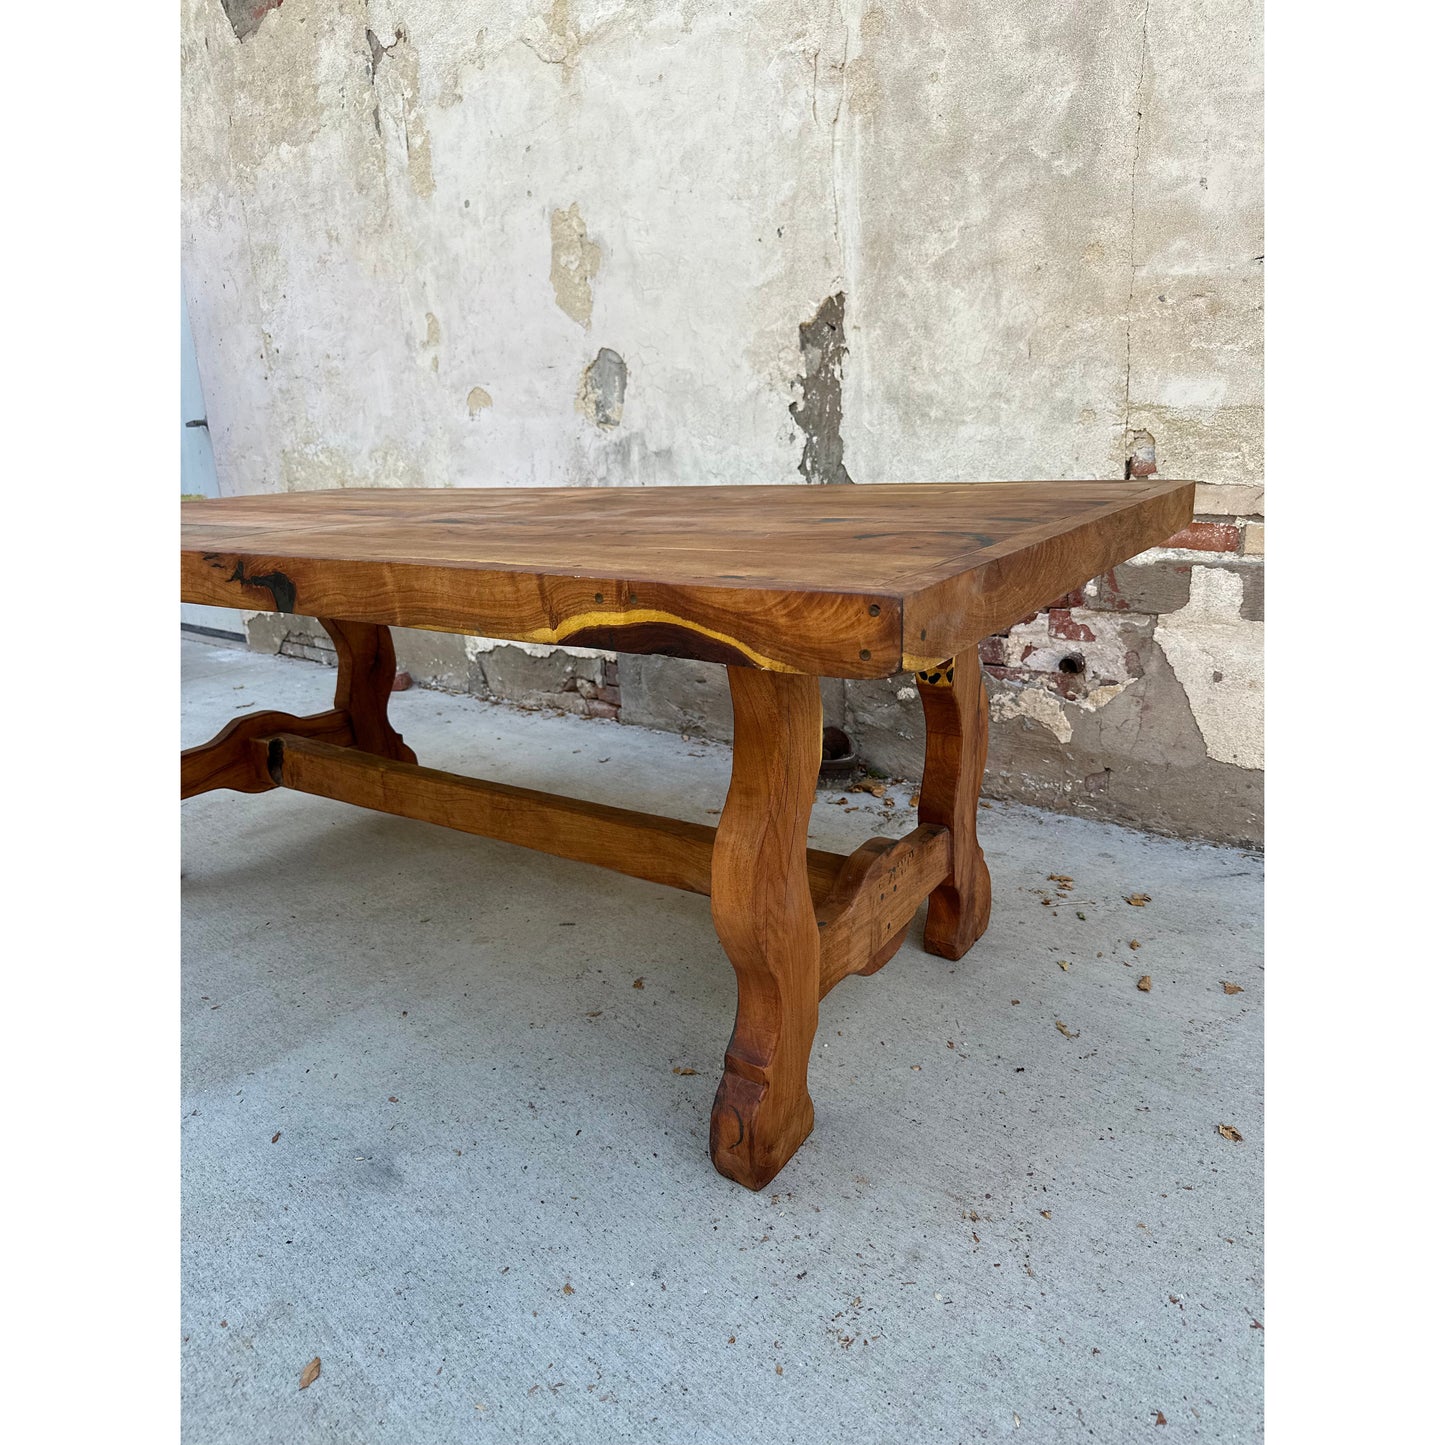 Our stunning Mesquite Dining Table features solid mesquite wood with a natural finish for a look of rustic elegance. The unique ox yoke leg design creates a look unlike any other, while custom sizing is available to fit your specific needs.